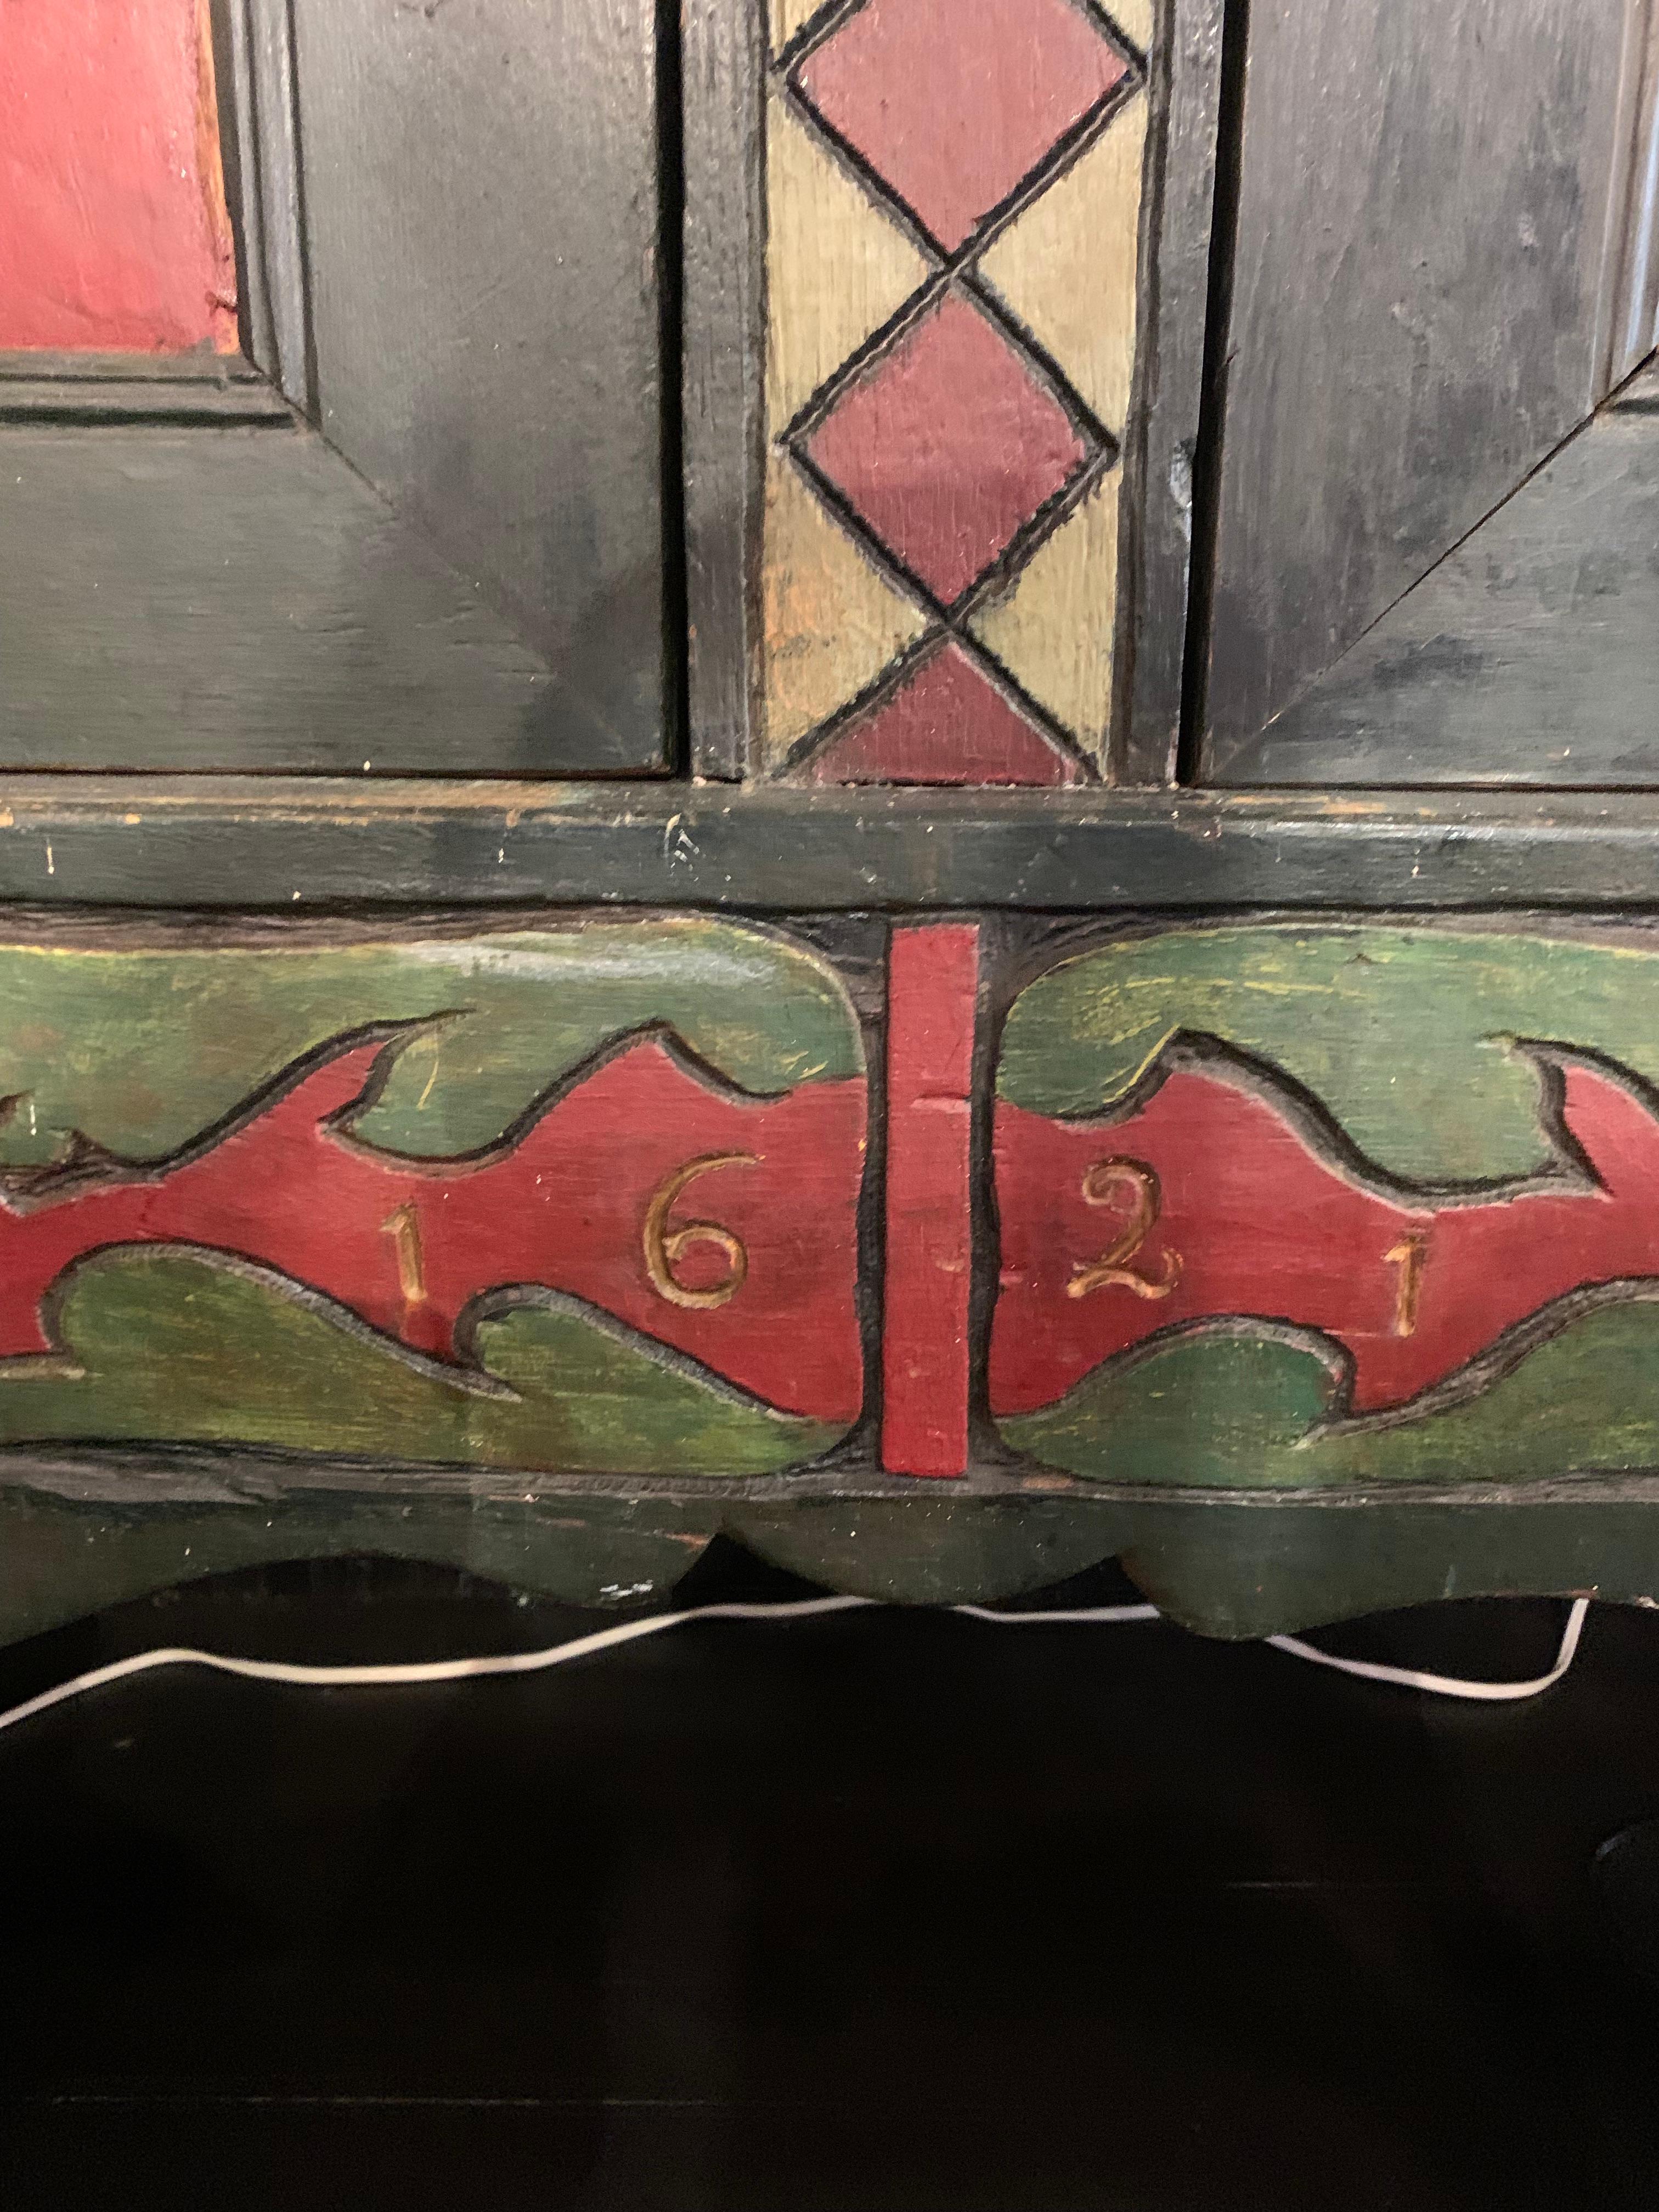 Exceptional brightly painted colonial folk cabinet in excellent condition, with some minor repairs. The date of “1621” is carved in the front panel with a carved man and woman figure head in each corner. Possibly a wedding chest. Original hardware.